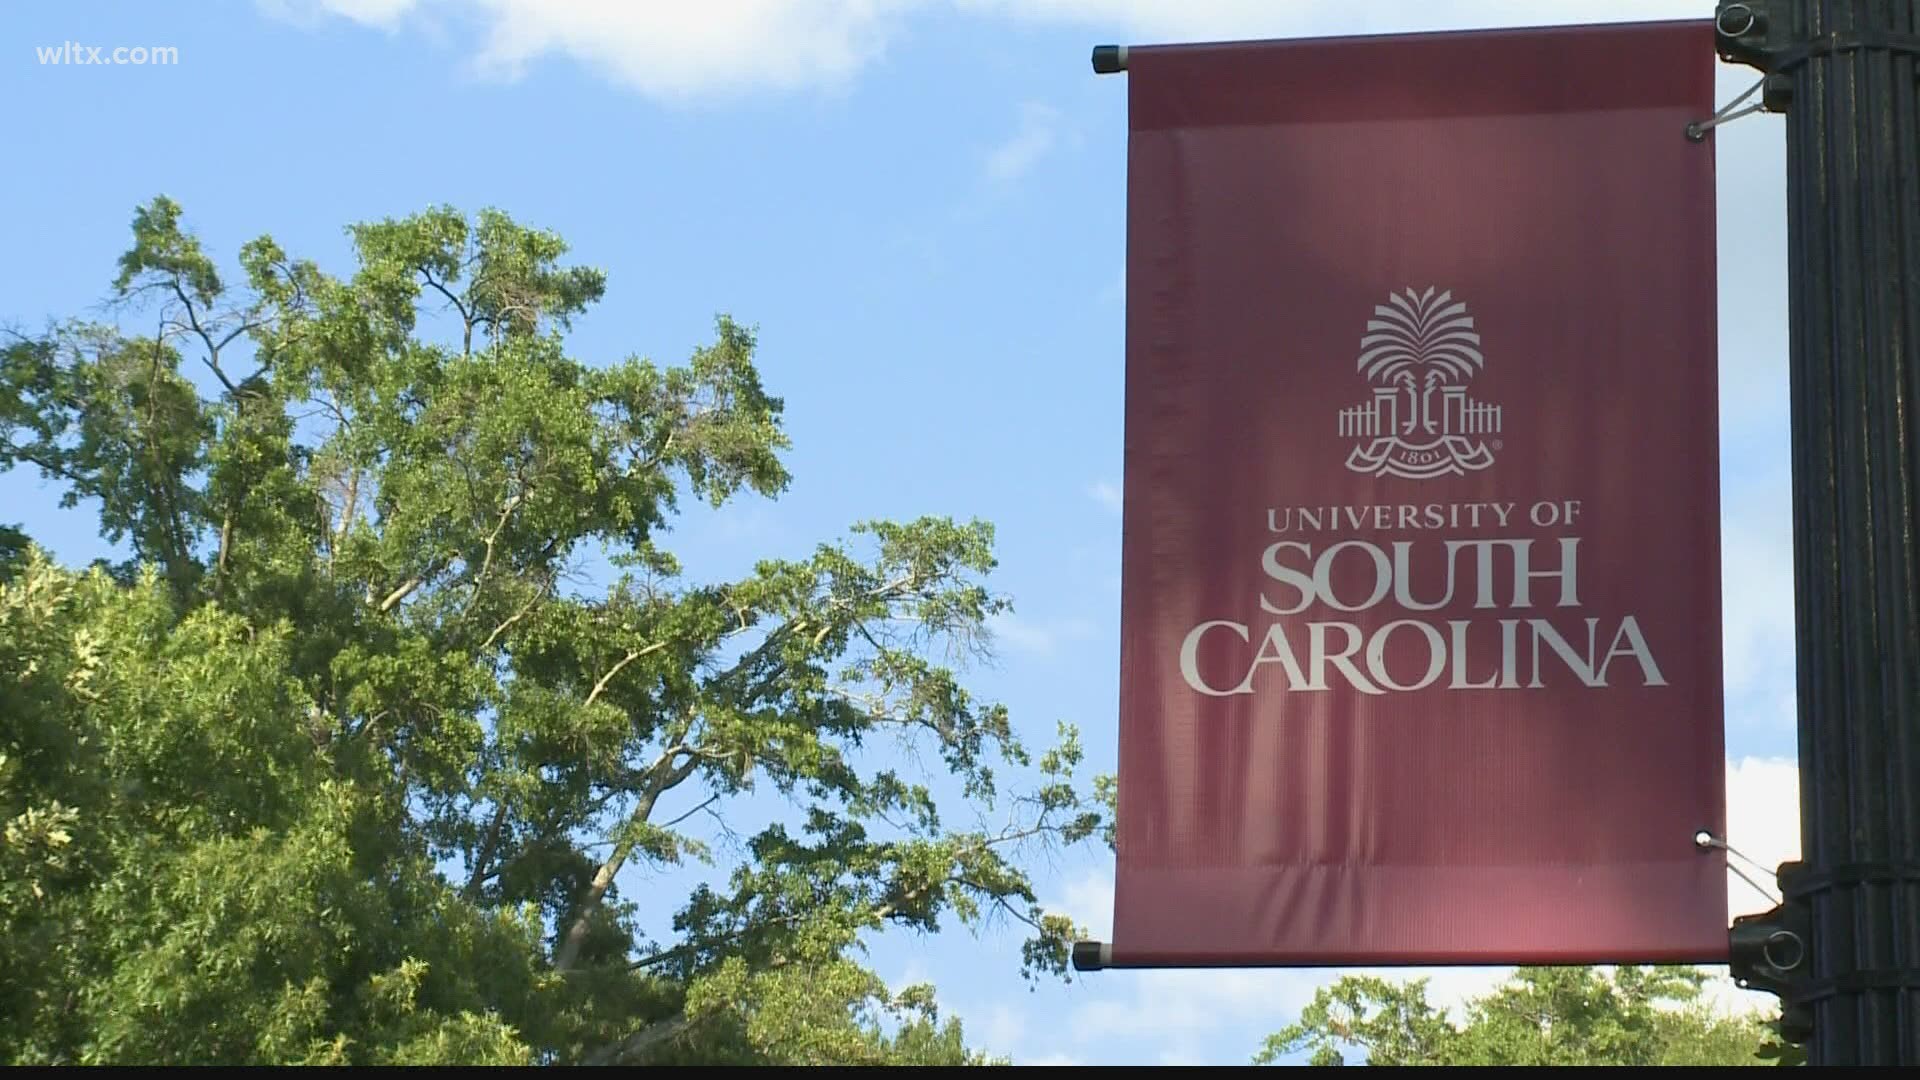 It's a first for the University of South Carolina. The university is not requiring standardized test scores for applicants.